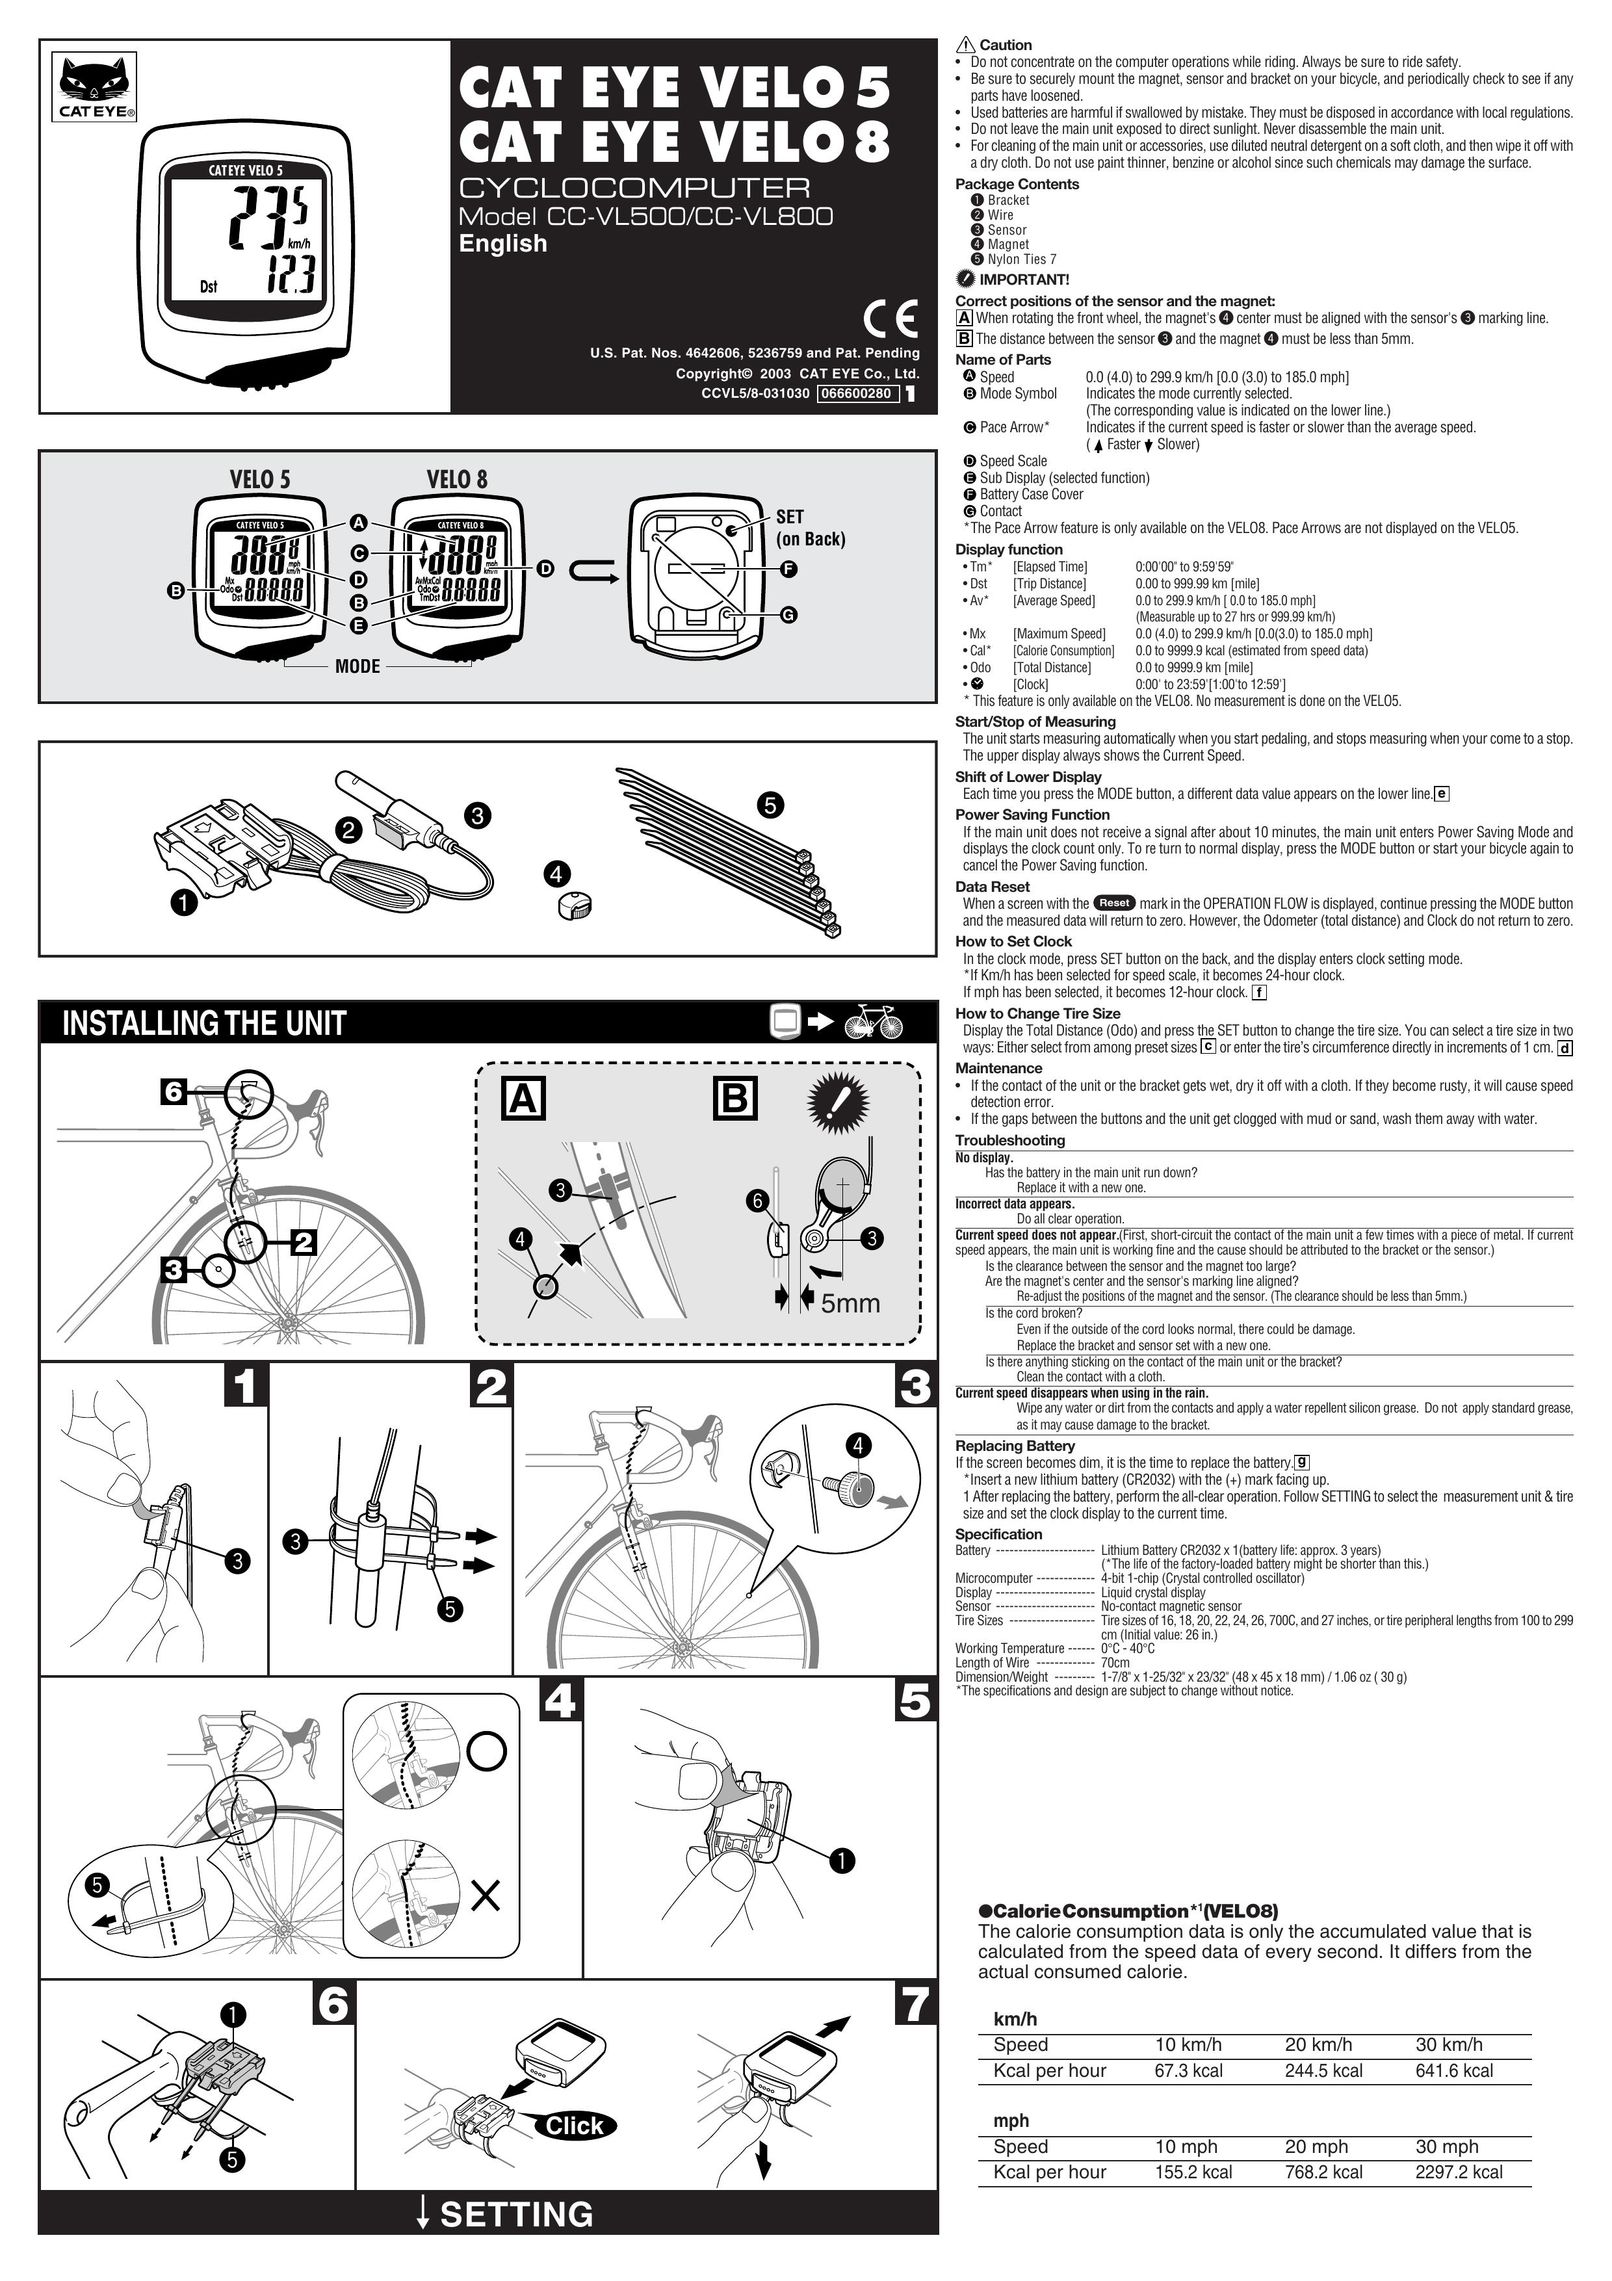 Cateye CC-VL500 Bicycle Accessories User Manual